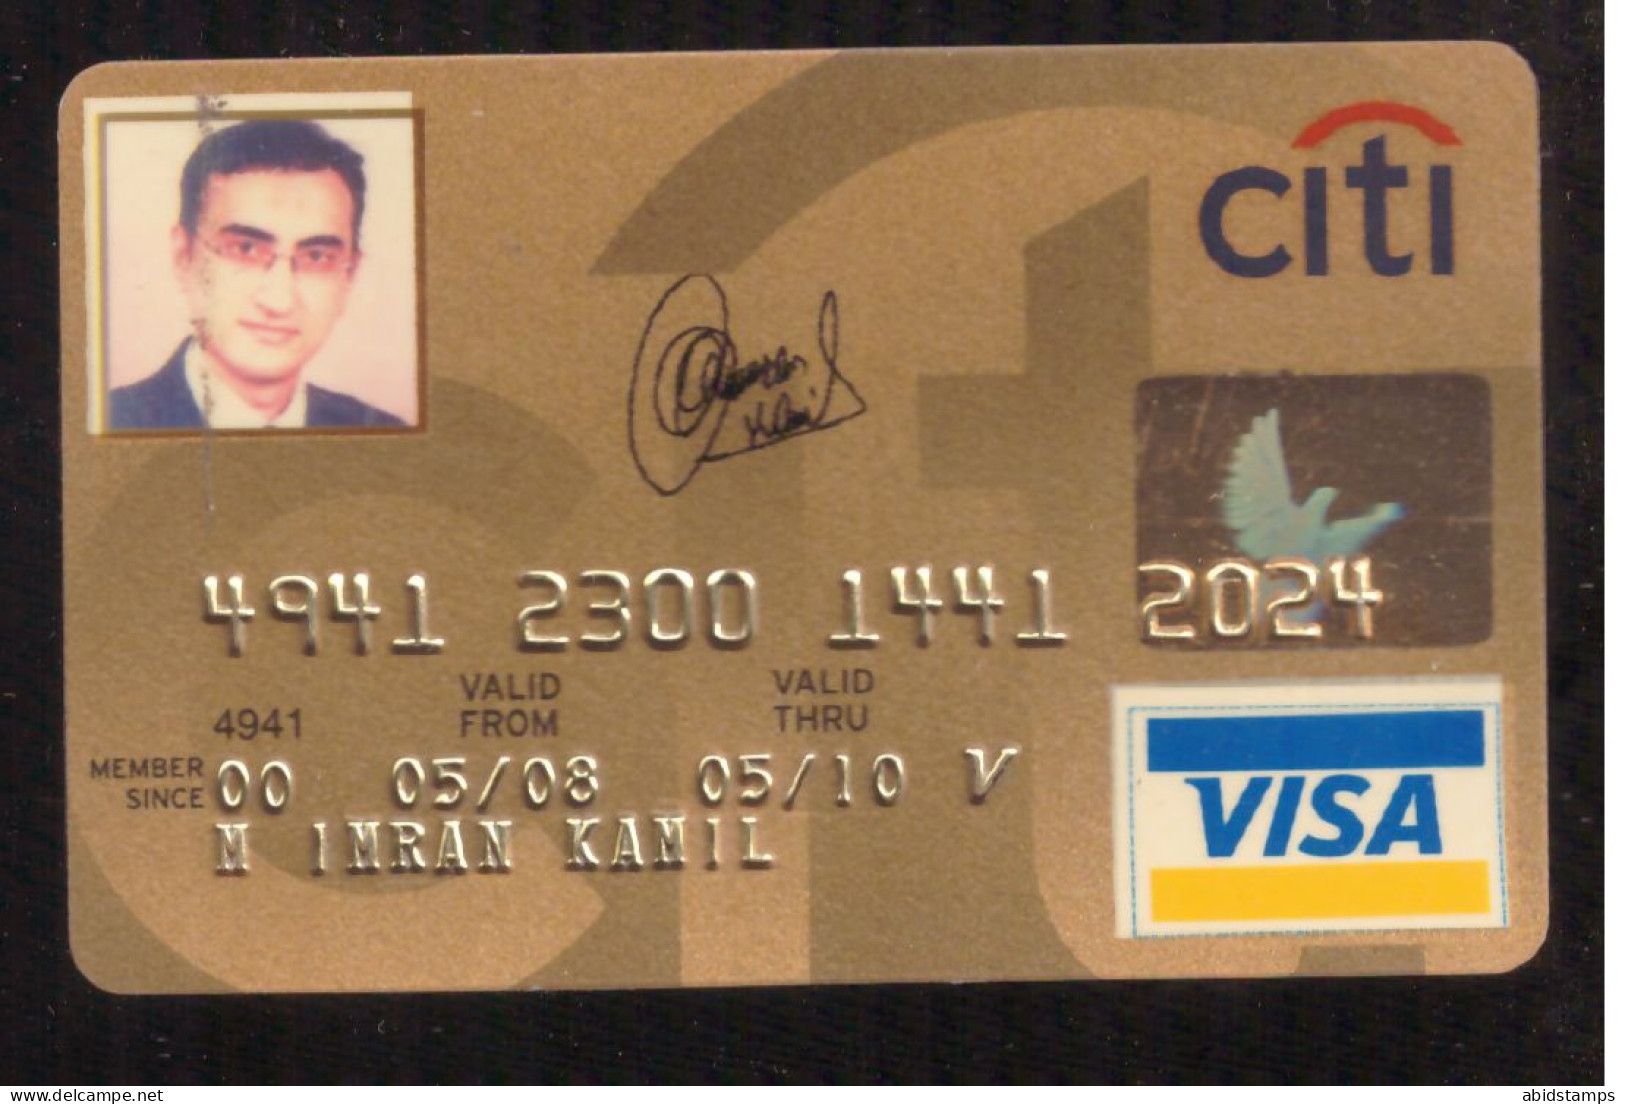 USED COLLECTABLE CARD CITIBANK VISA CARD - Credit Cards (Exp. Date Min. 10 Years)